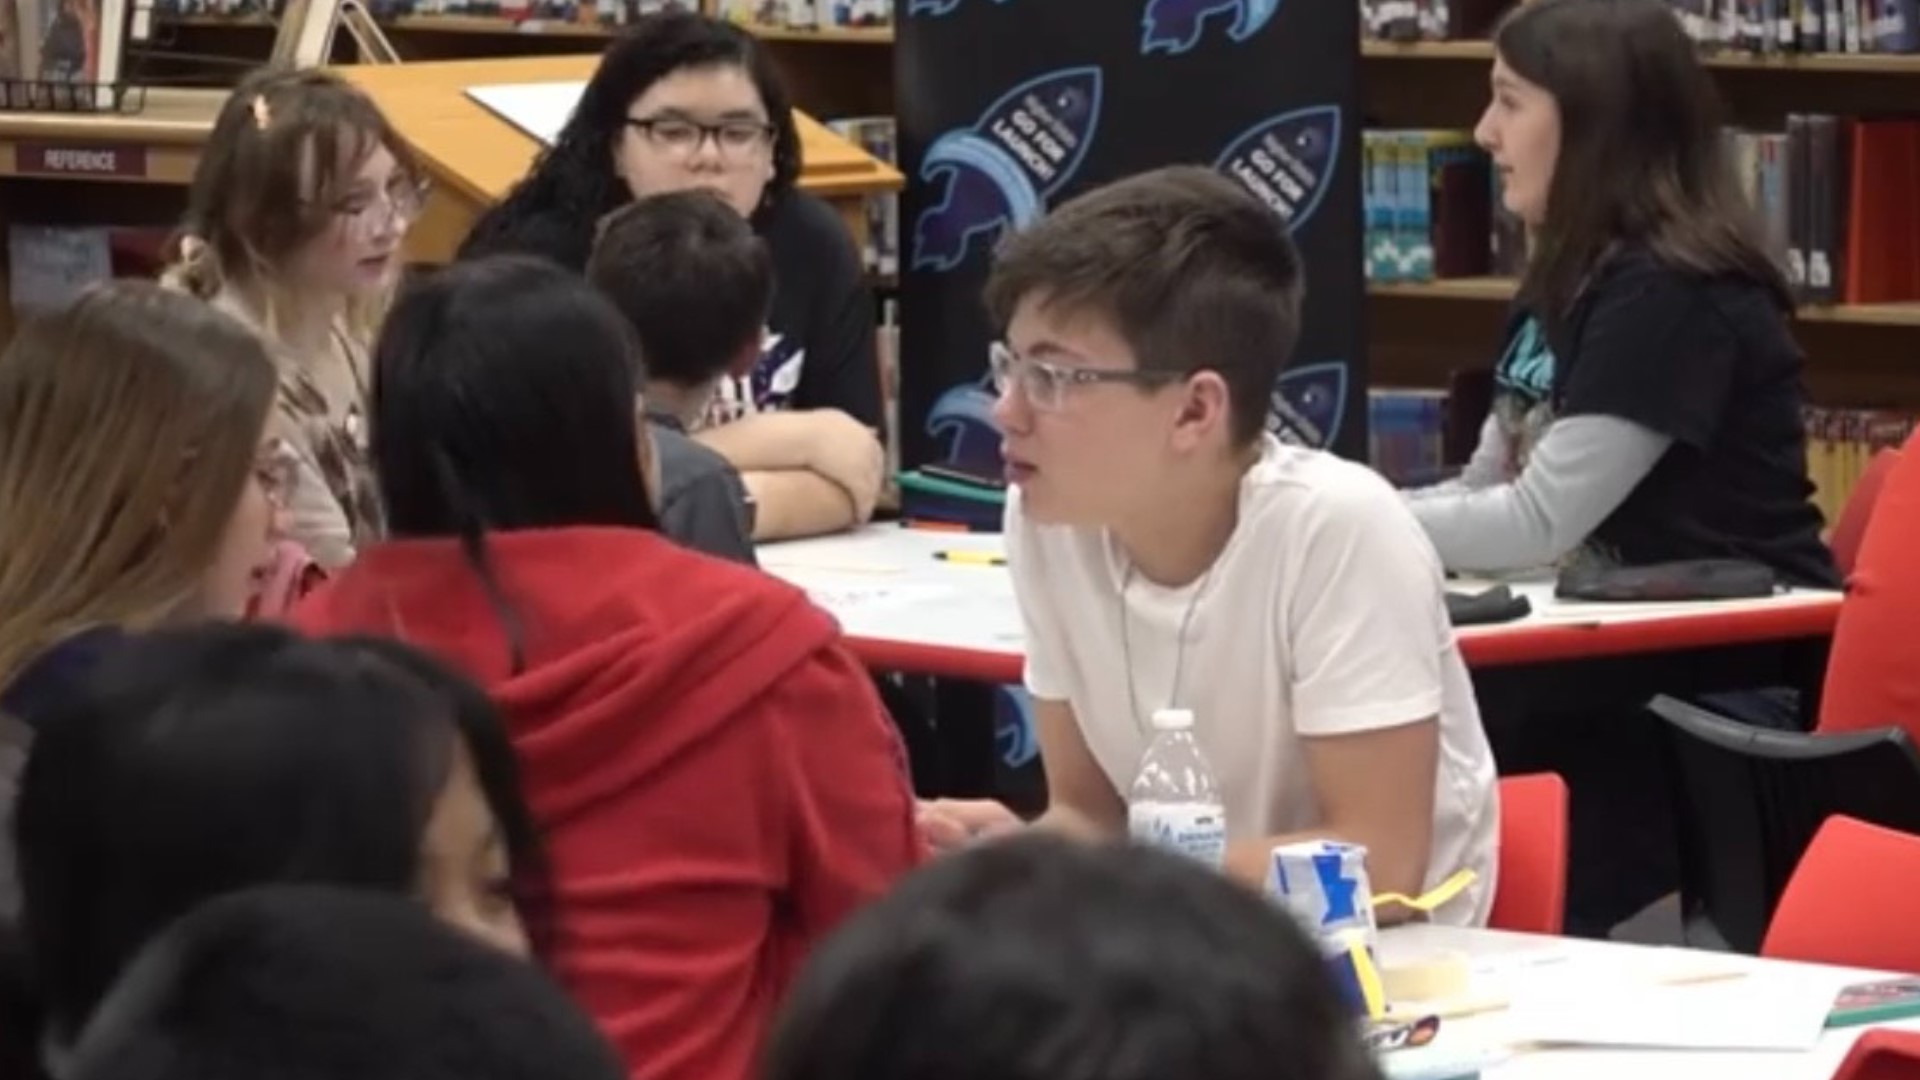 Through a partnership between Midland ISD and Higher Orbits, astronauts teach students about space. MDC agreed to continue the program for a third year in a row.